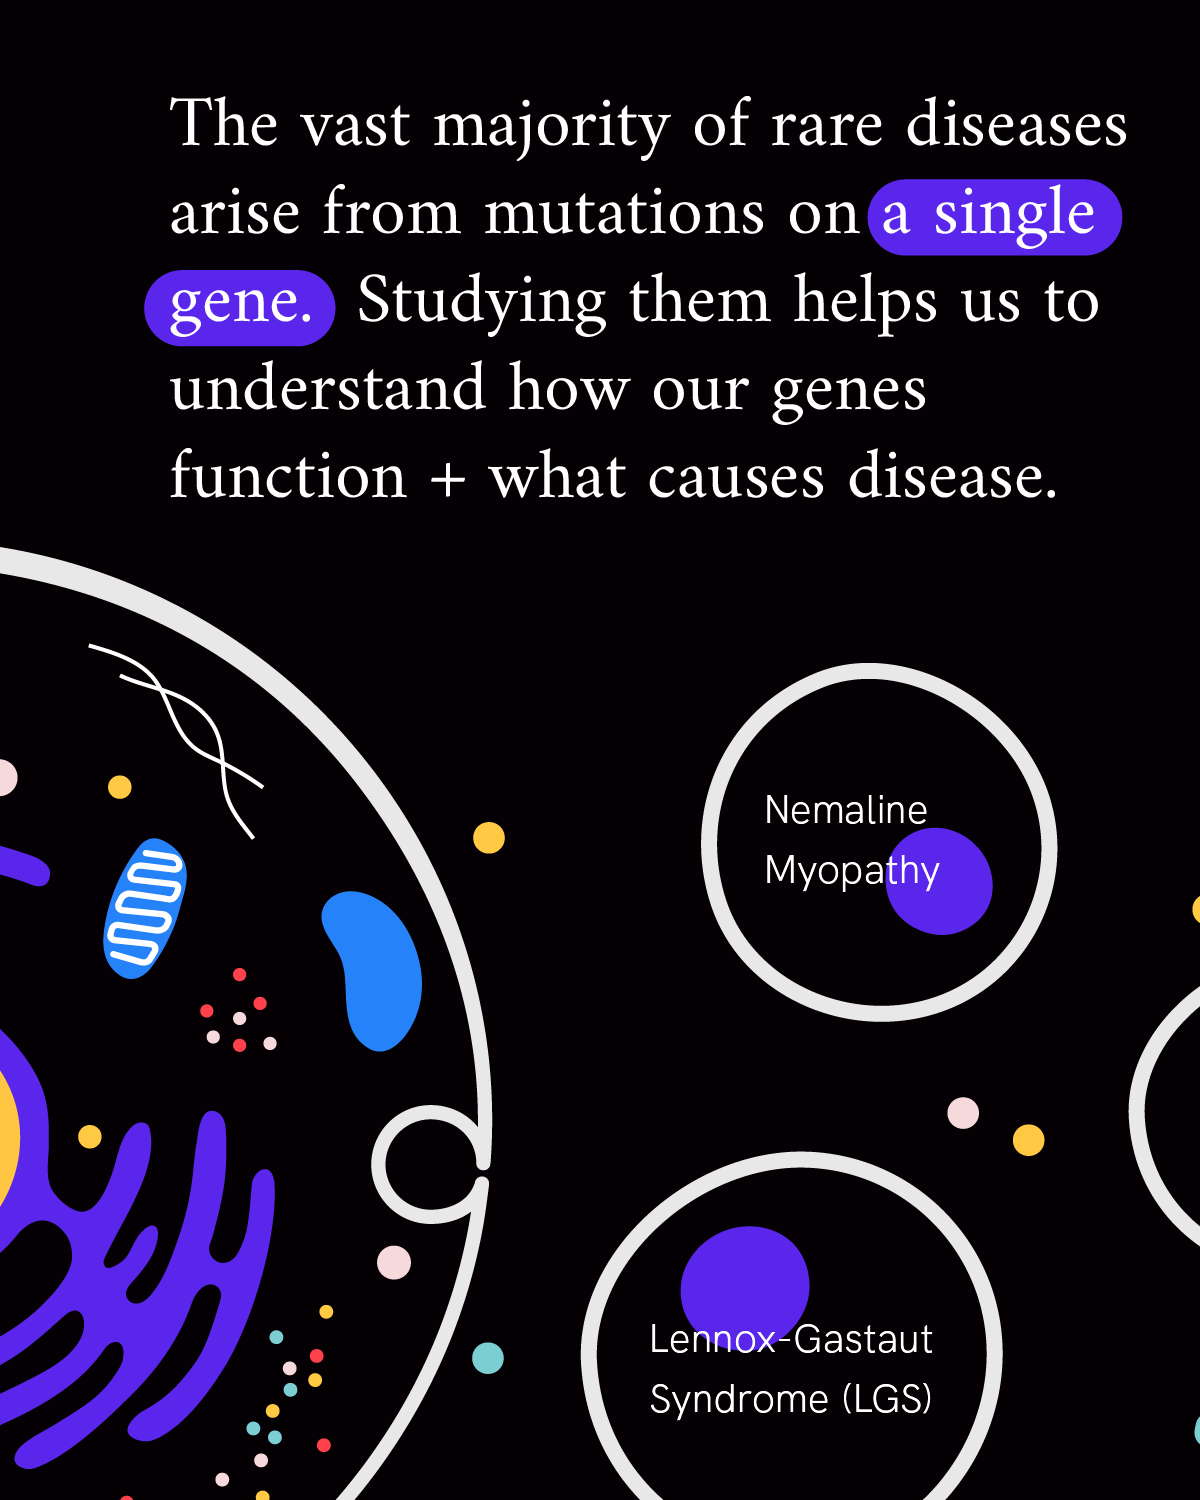 Infographic reads “The vast majority of rare diseases arise from mutations on a single gene. Studying them helps us understand how our genes function + what causes disease.” Purple, blue, white and yellow illustrations of the parts of a cell — represented by squiggles, ovals, and dots — including two circles that spell out the names of two rare diseases accompany the text.